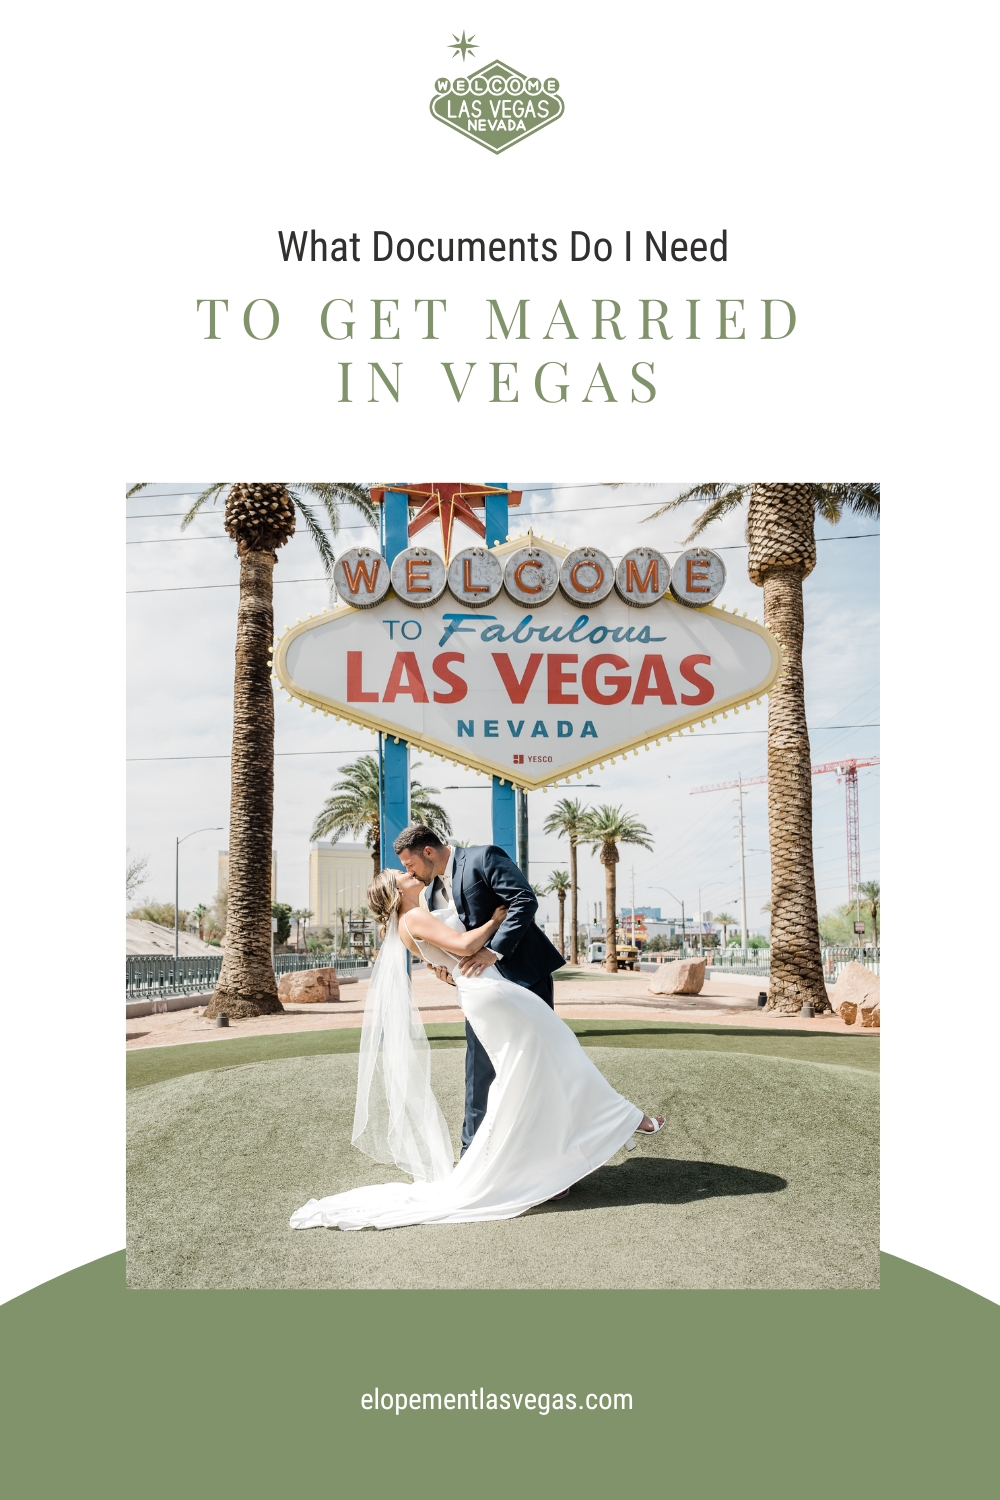 Bride and groom leaning in for a kiss in front of welcome sign; image overlaid with text that reads What Documents Do I Need To Get Married In Vegas